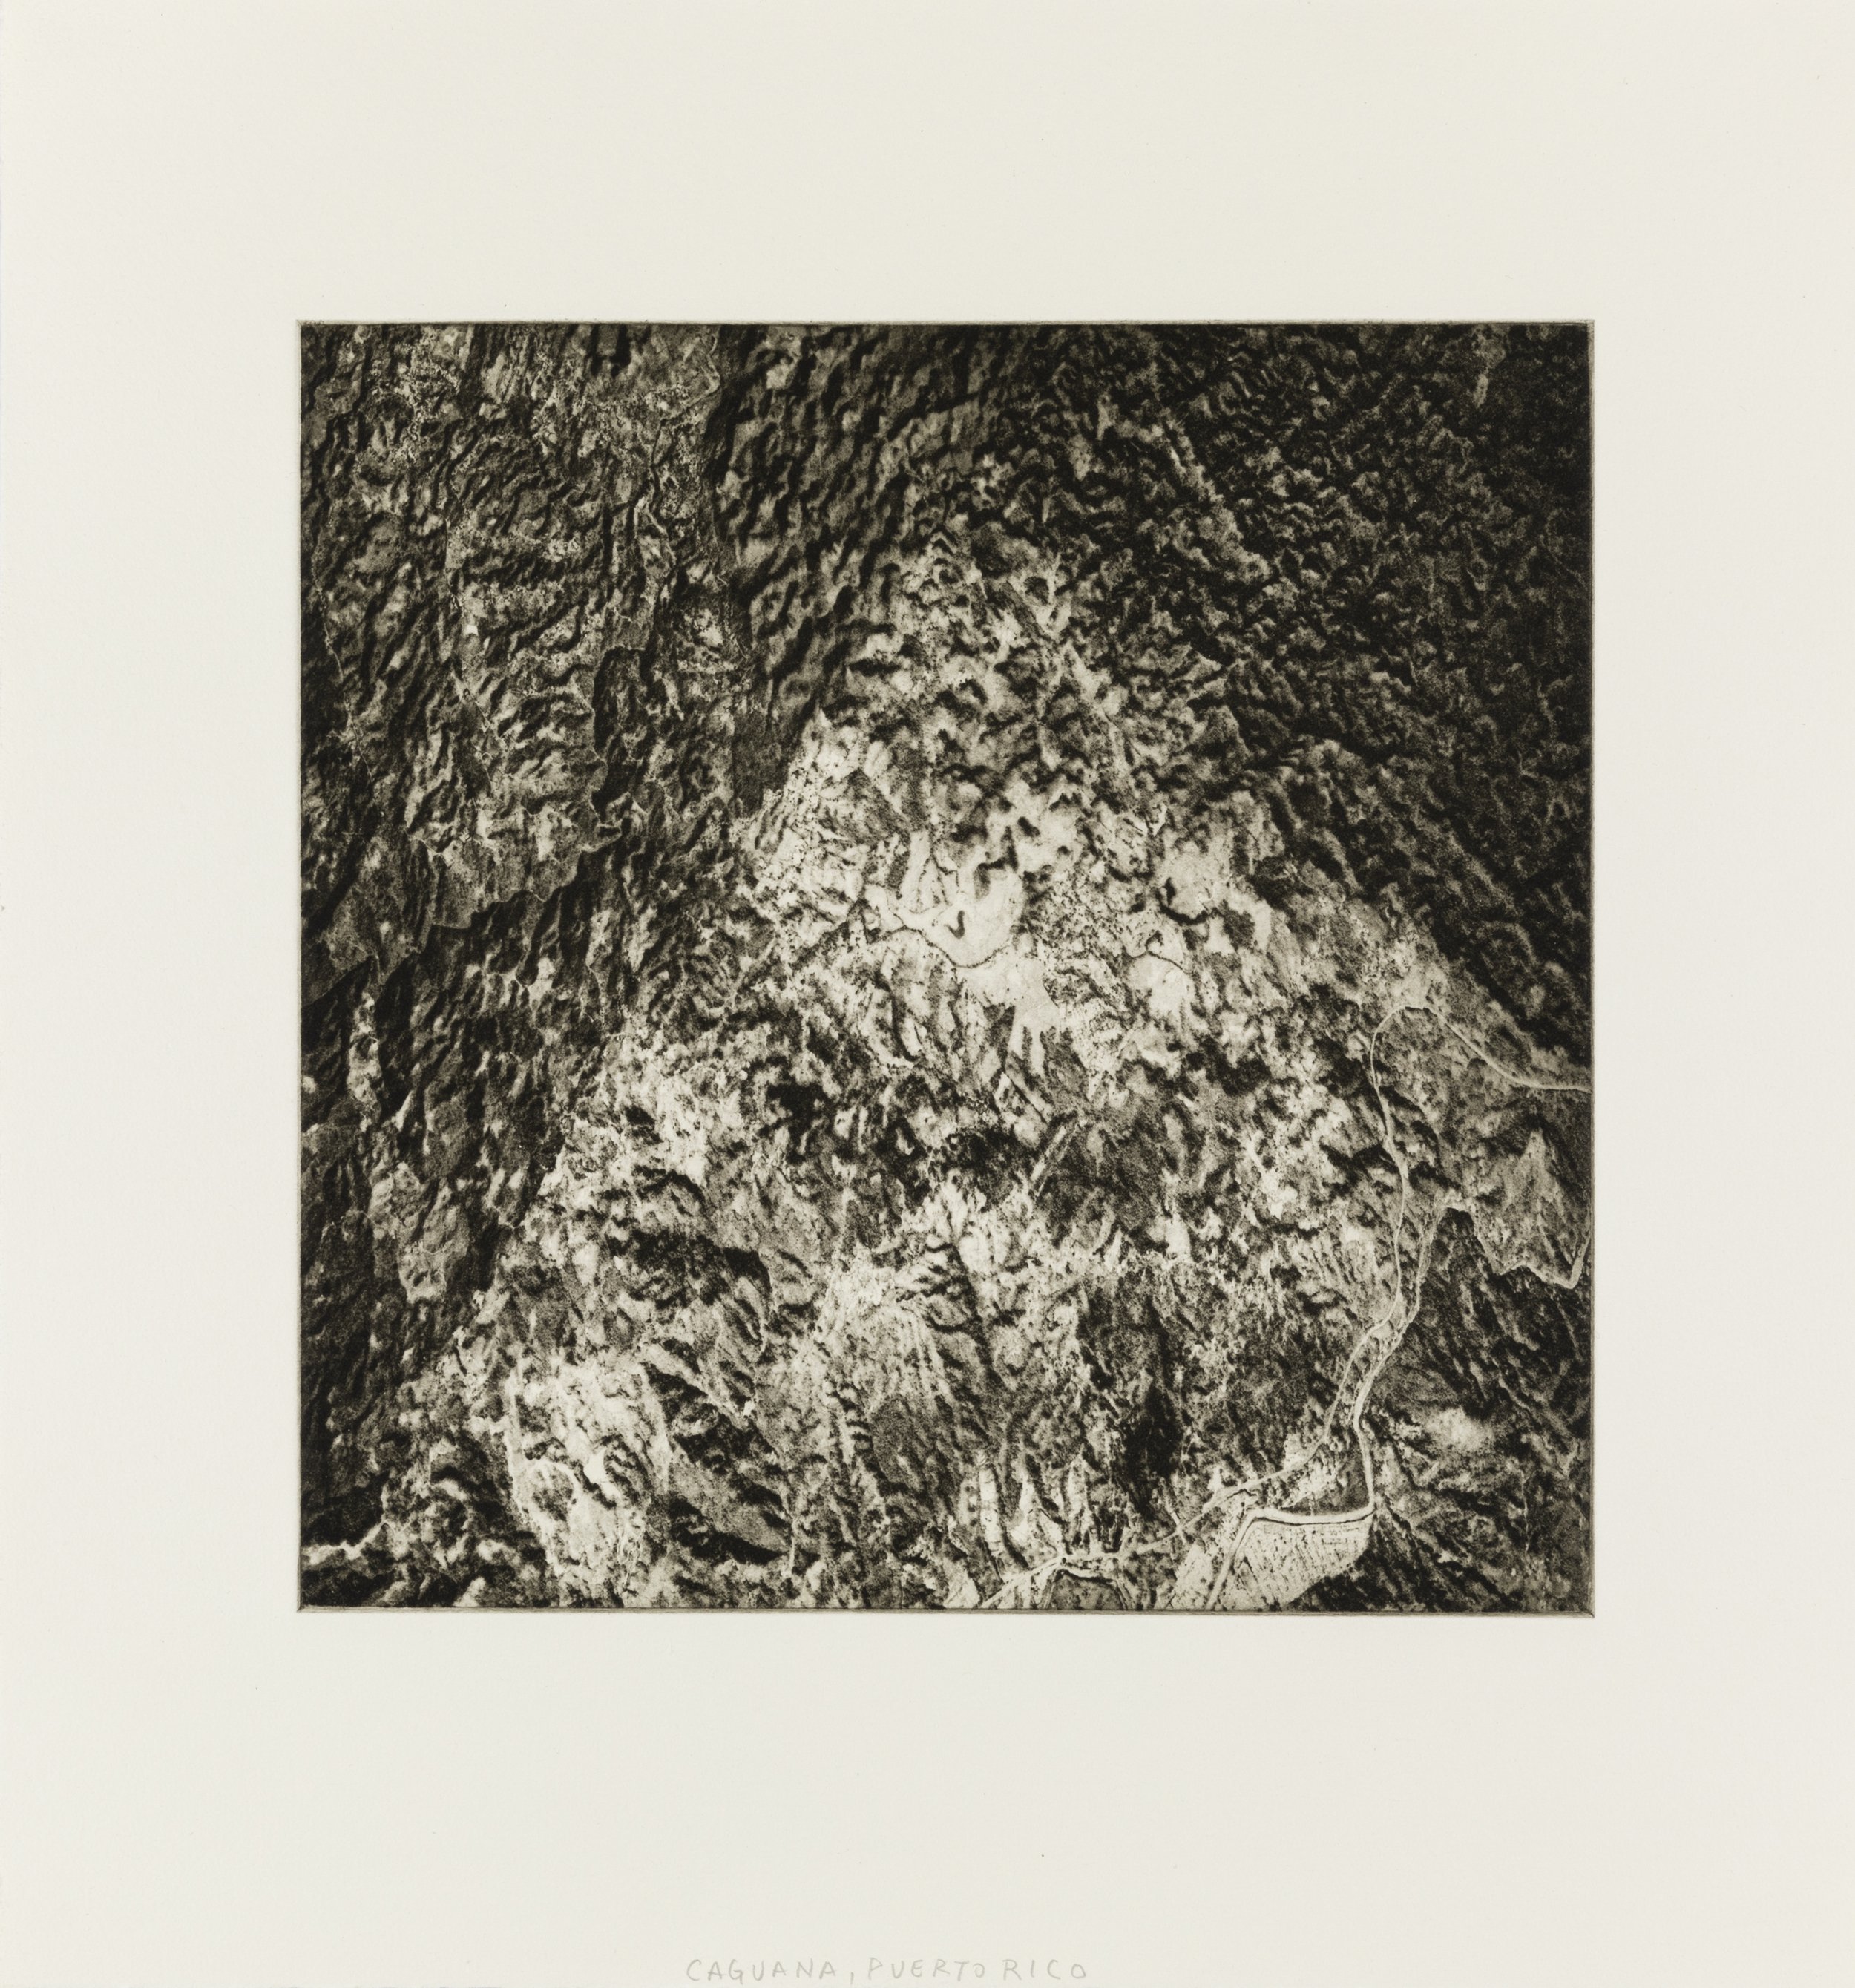    Caguana, Puerto Rico, 2022   Copperplate photogravure etching on cotton rag paper, plate size; 10.6 x 10.6, paper size; 16 x 15.5, edition 10  